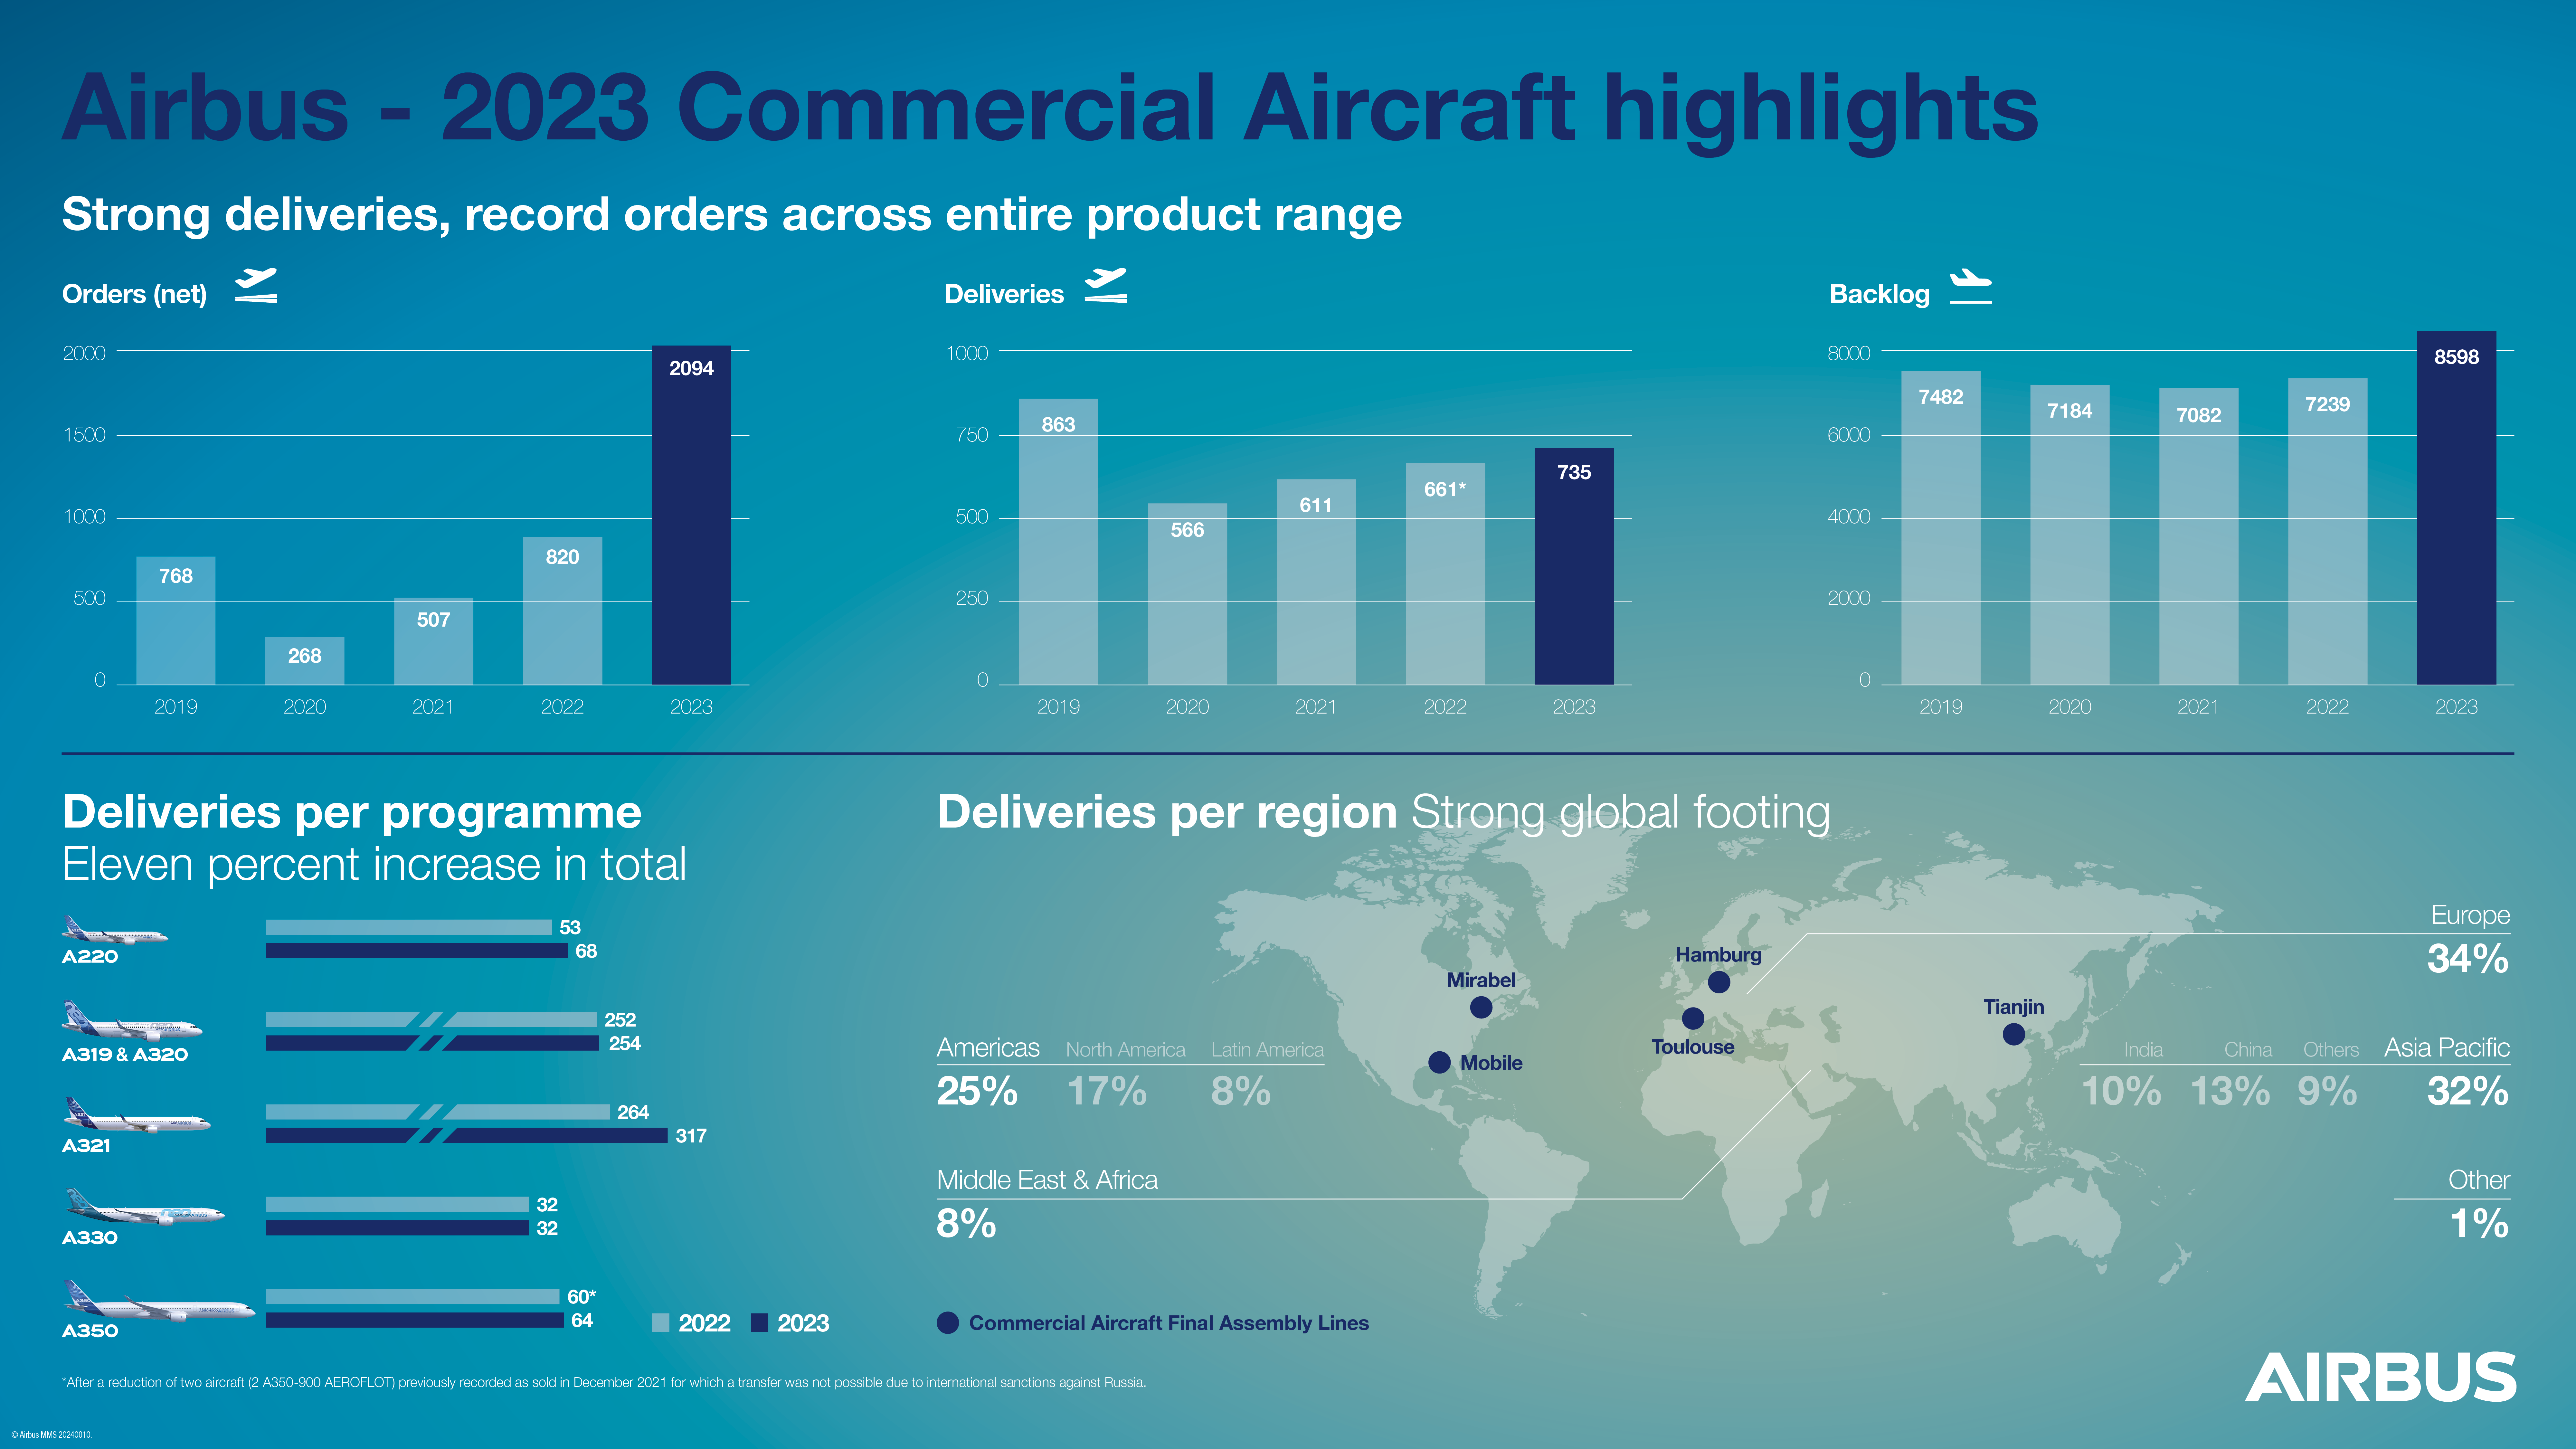 Airbus-Infographic-2023-Commercial-Aircraft-orders-and-deliveries